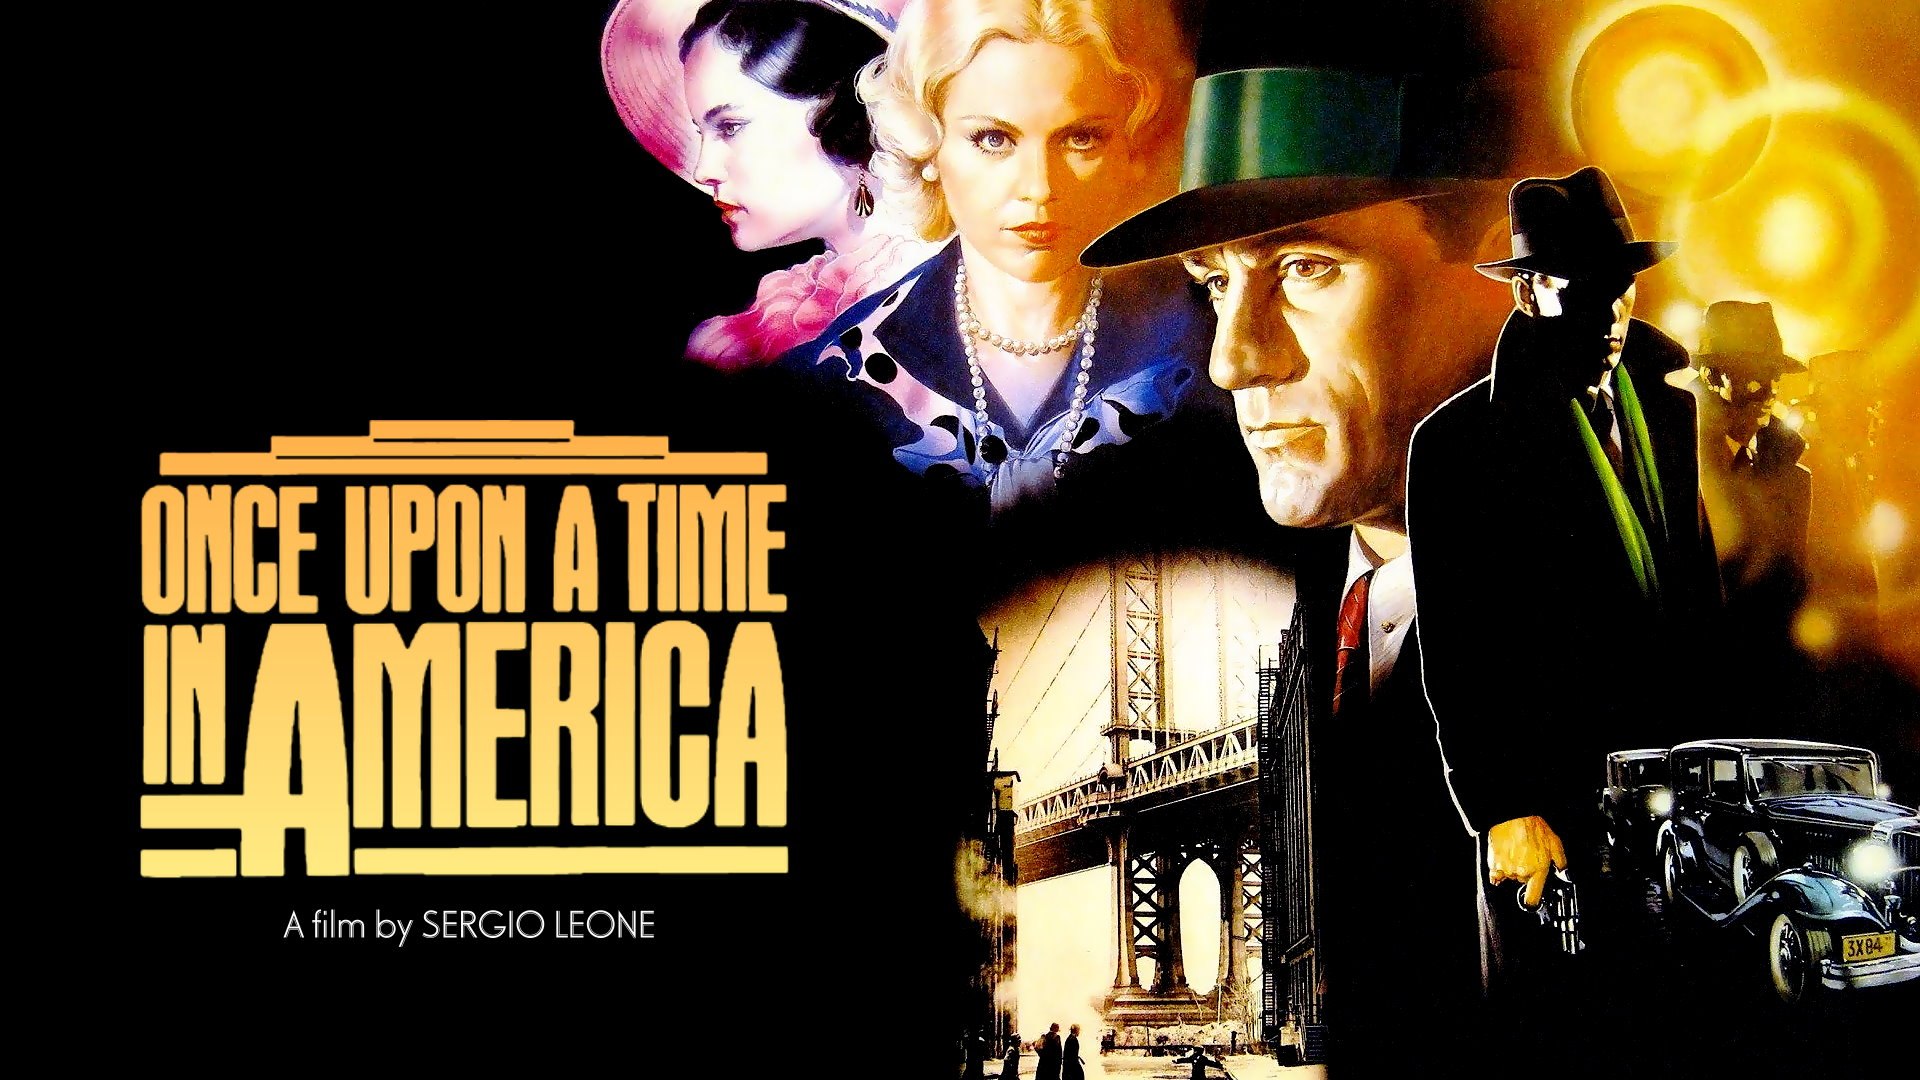 Once Upon a Time in America (1984) - Top 10 Gangster Movies of all time